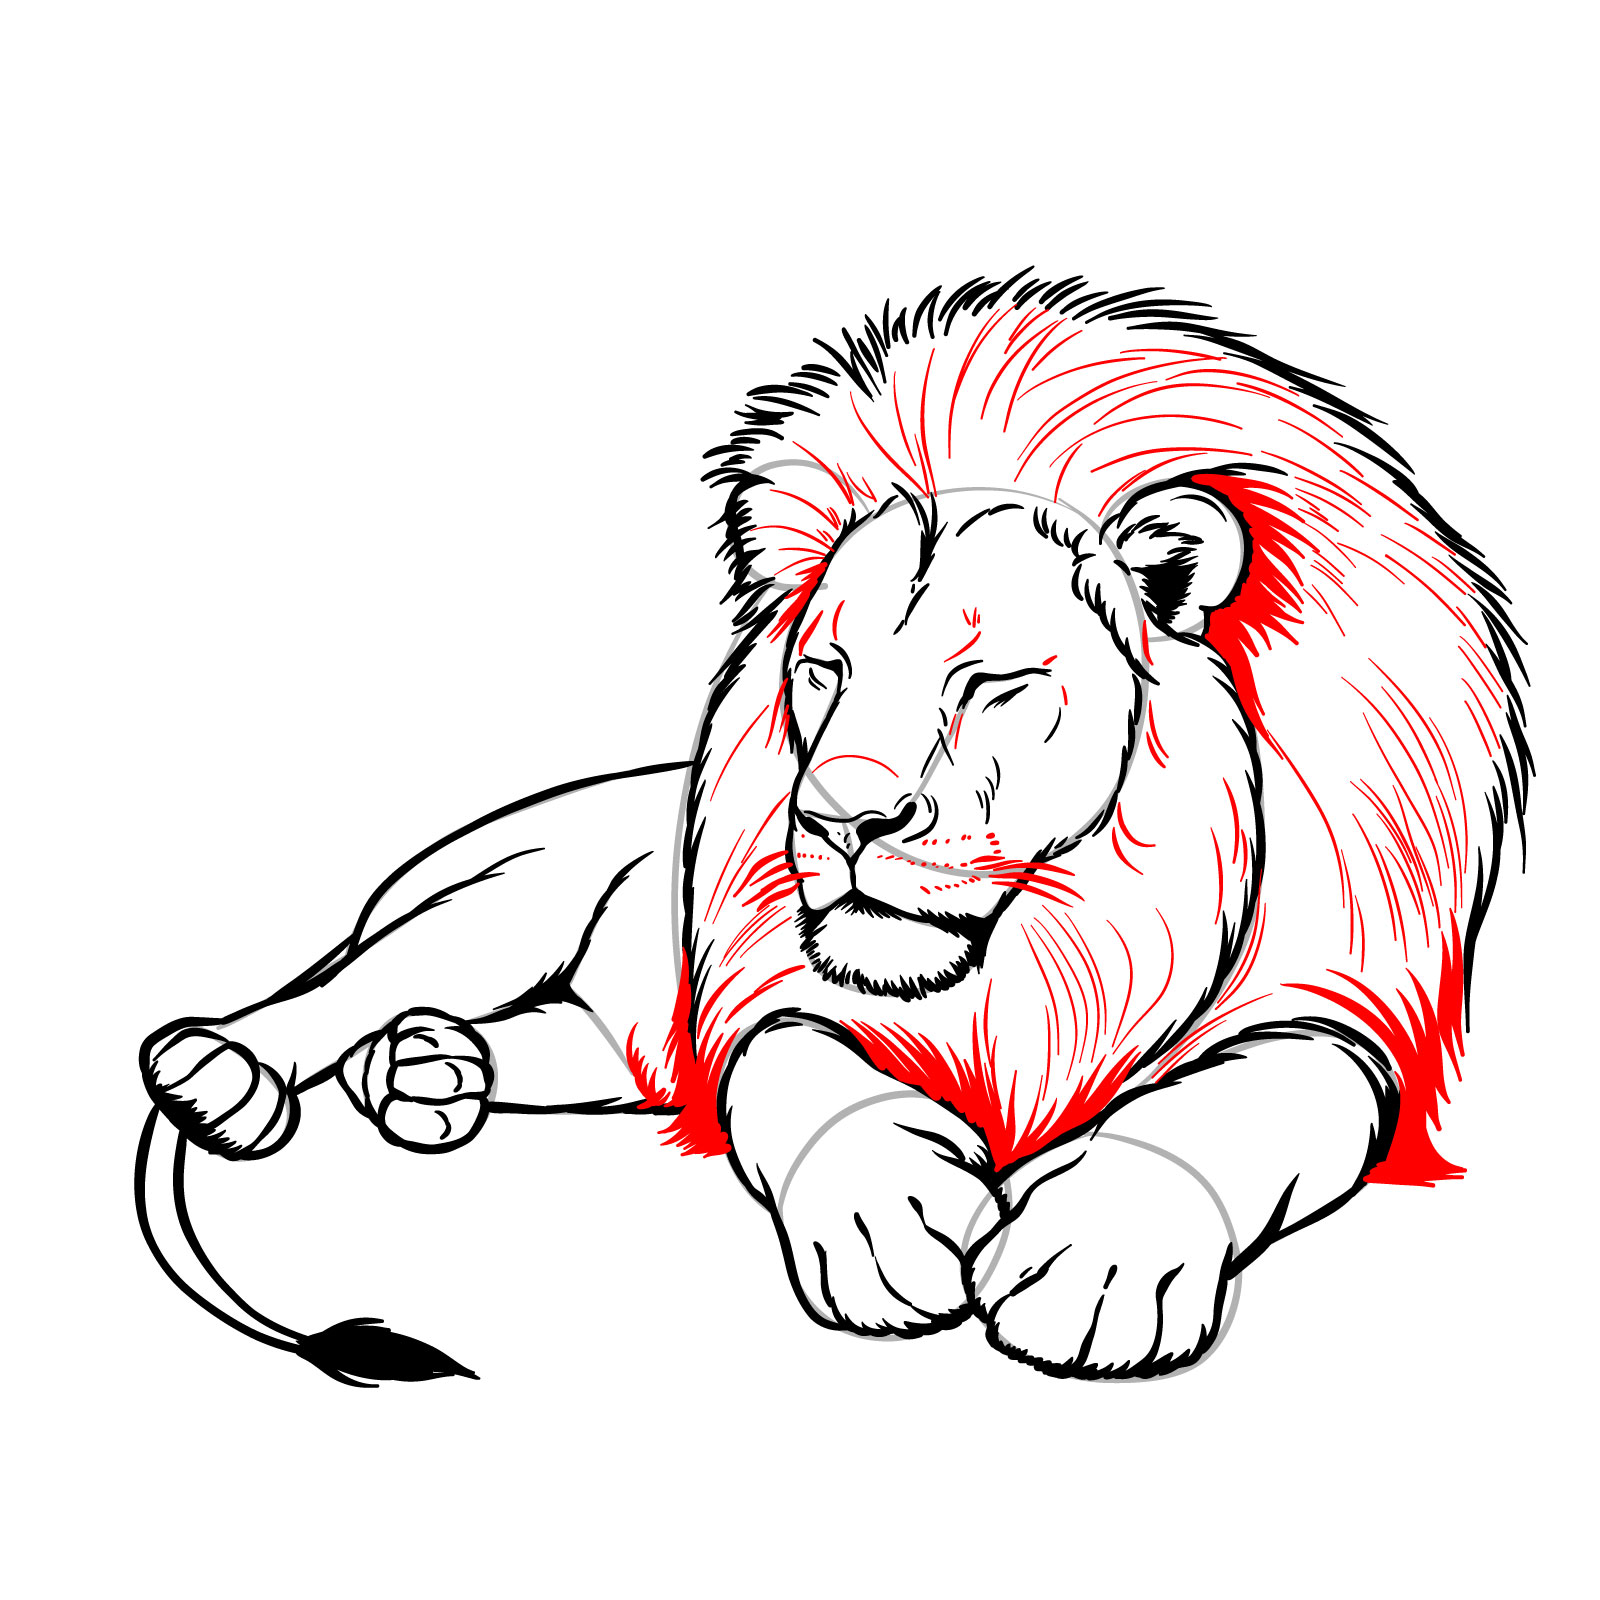 How to draw a sleeping lion in front view - Step 15: Adding facial and mane details